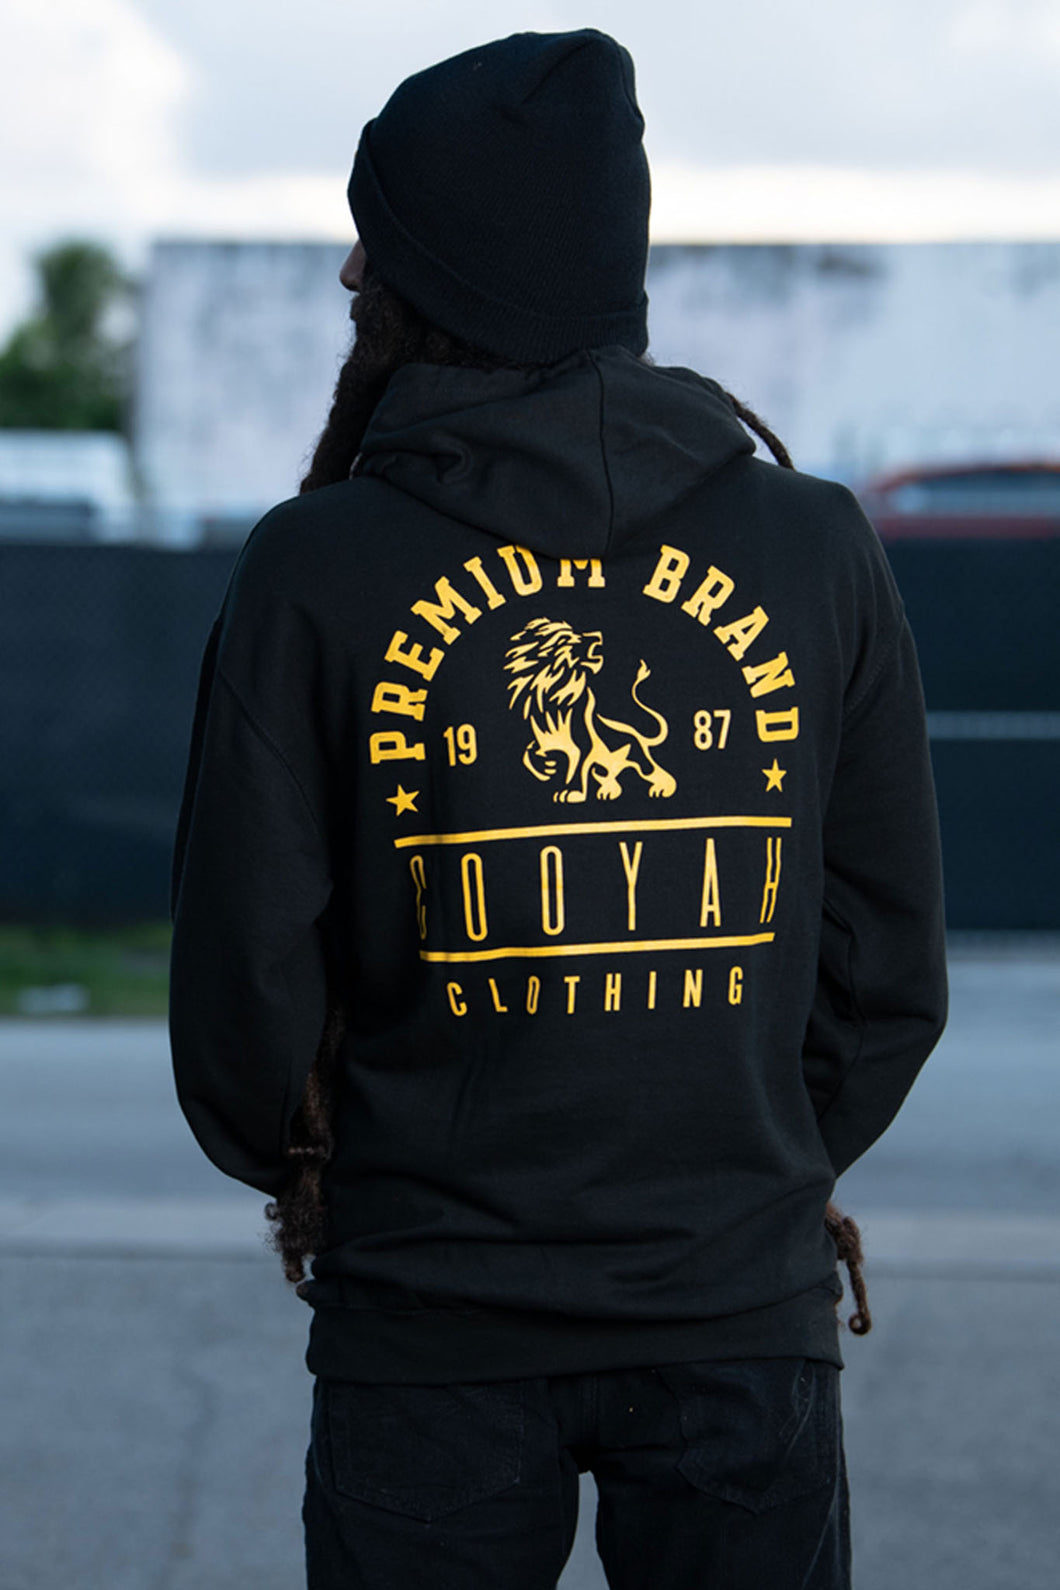 Cooyah Jamaica.  Men's black Premium Brand Hoodie with gold lion screen print on the front and back.  Jamaican streetwear clothing brand.